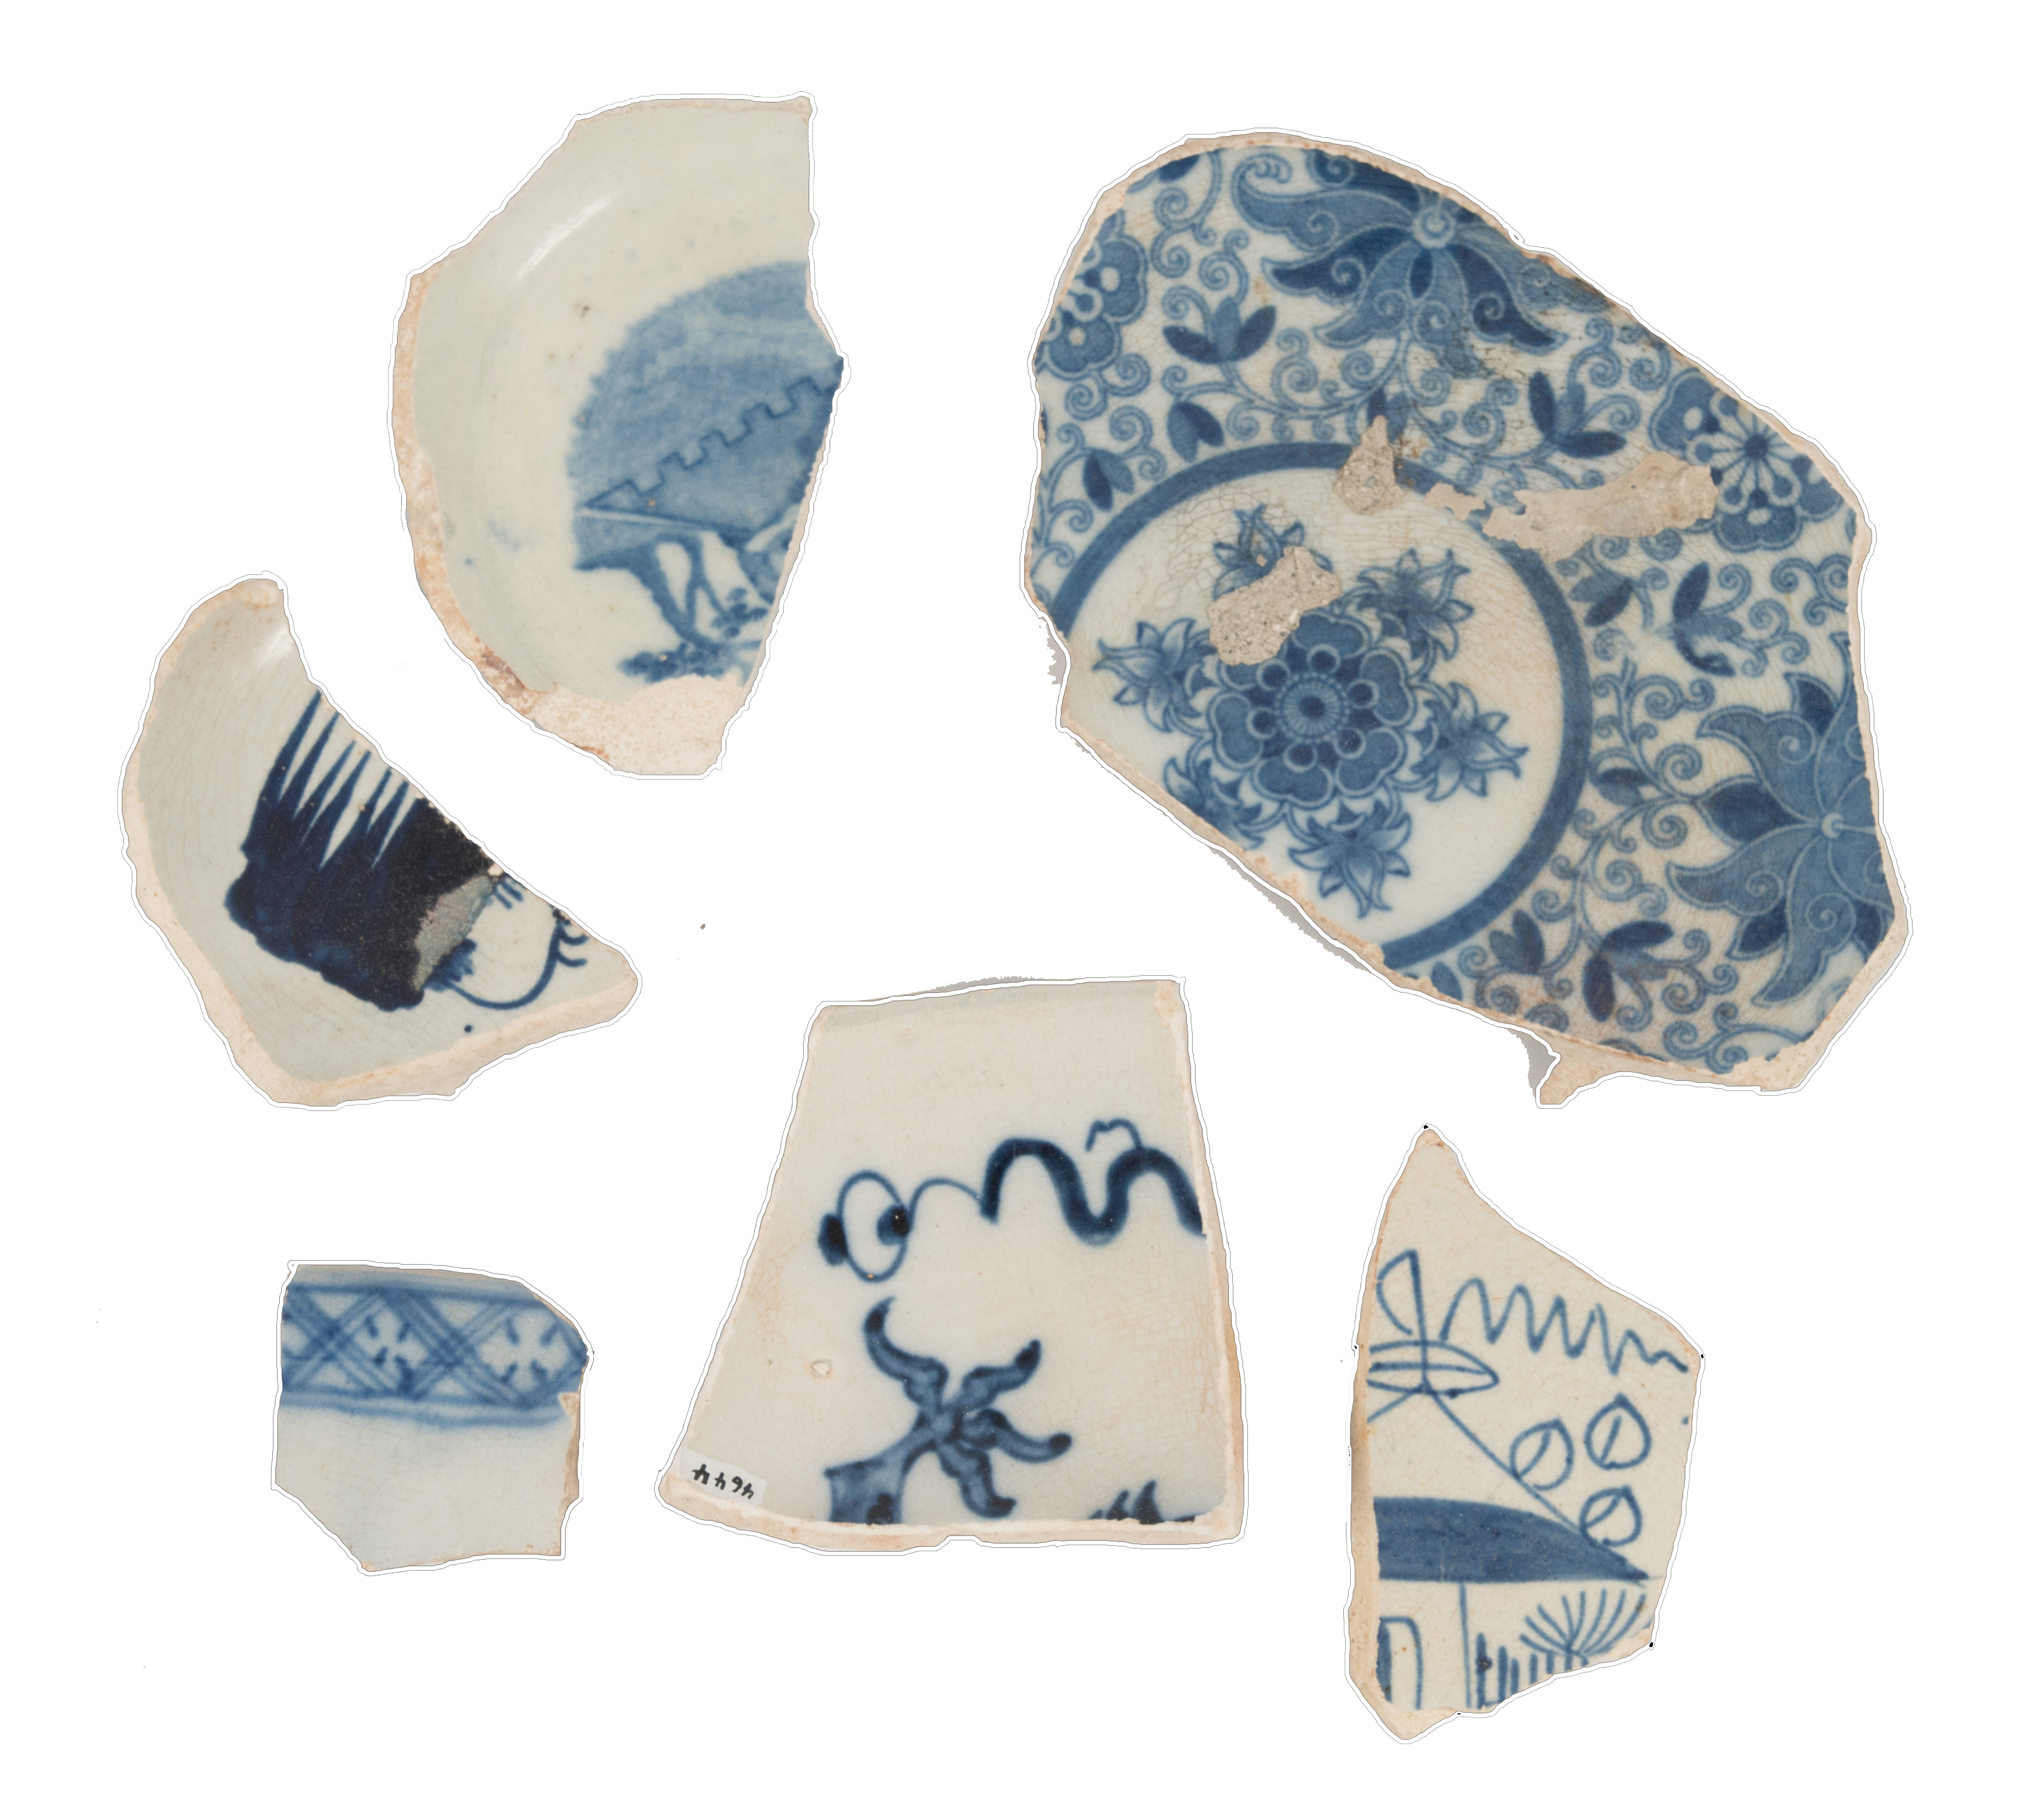 photo of pieces of painted pottery called Chaney on St. Croix